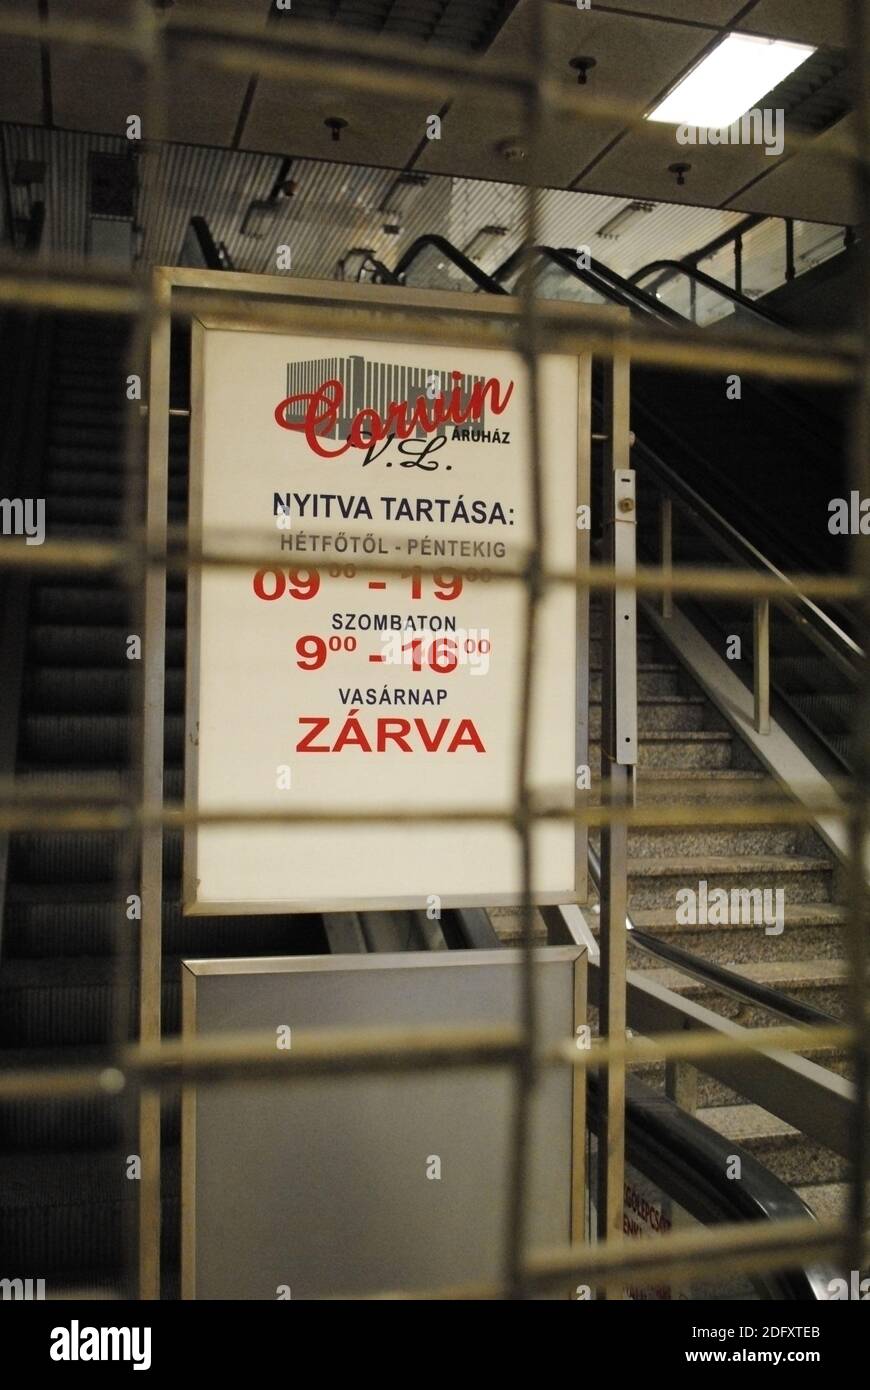 Escalators out of order in the Corvin department store, one of the oldest retail stores in Budapest. Currently closed, waiting for its renovation. Stock Photo